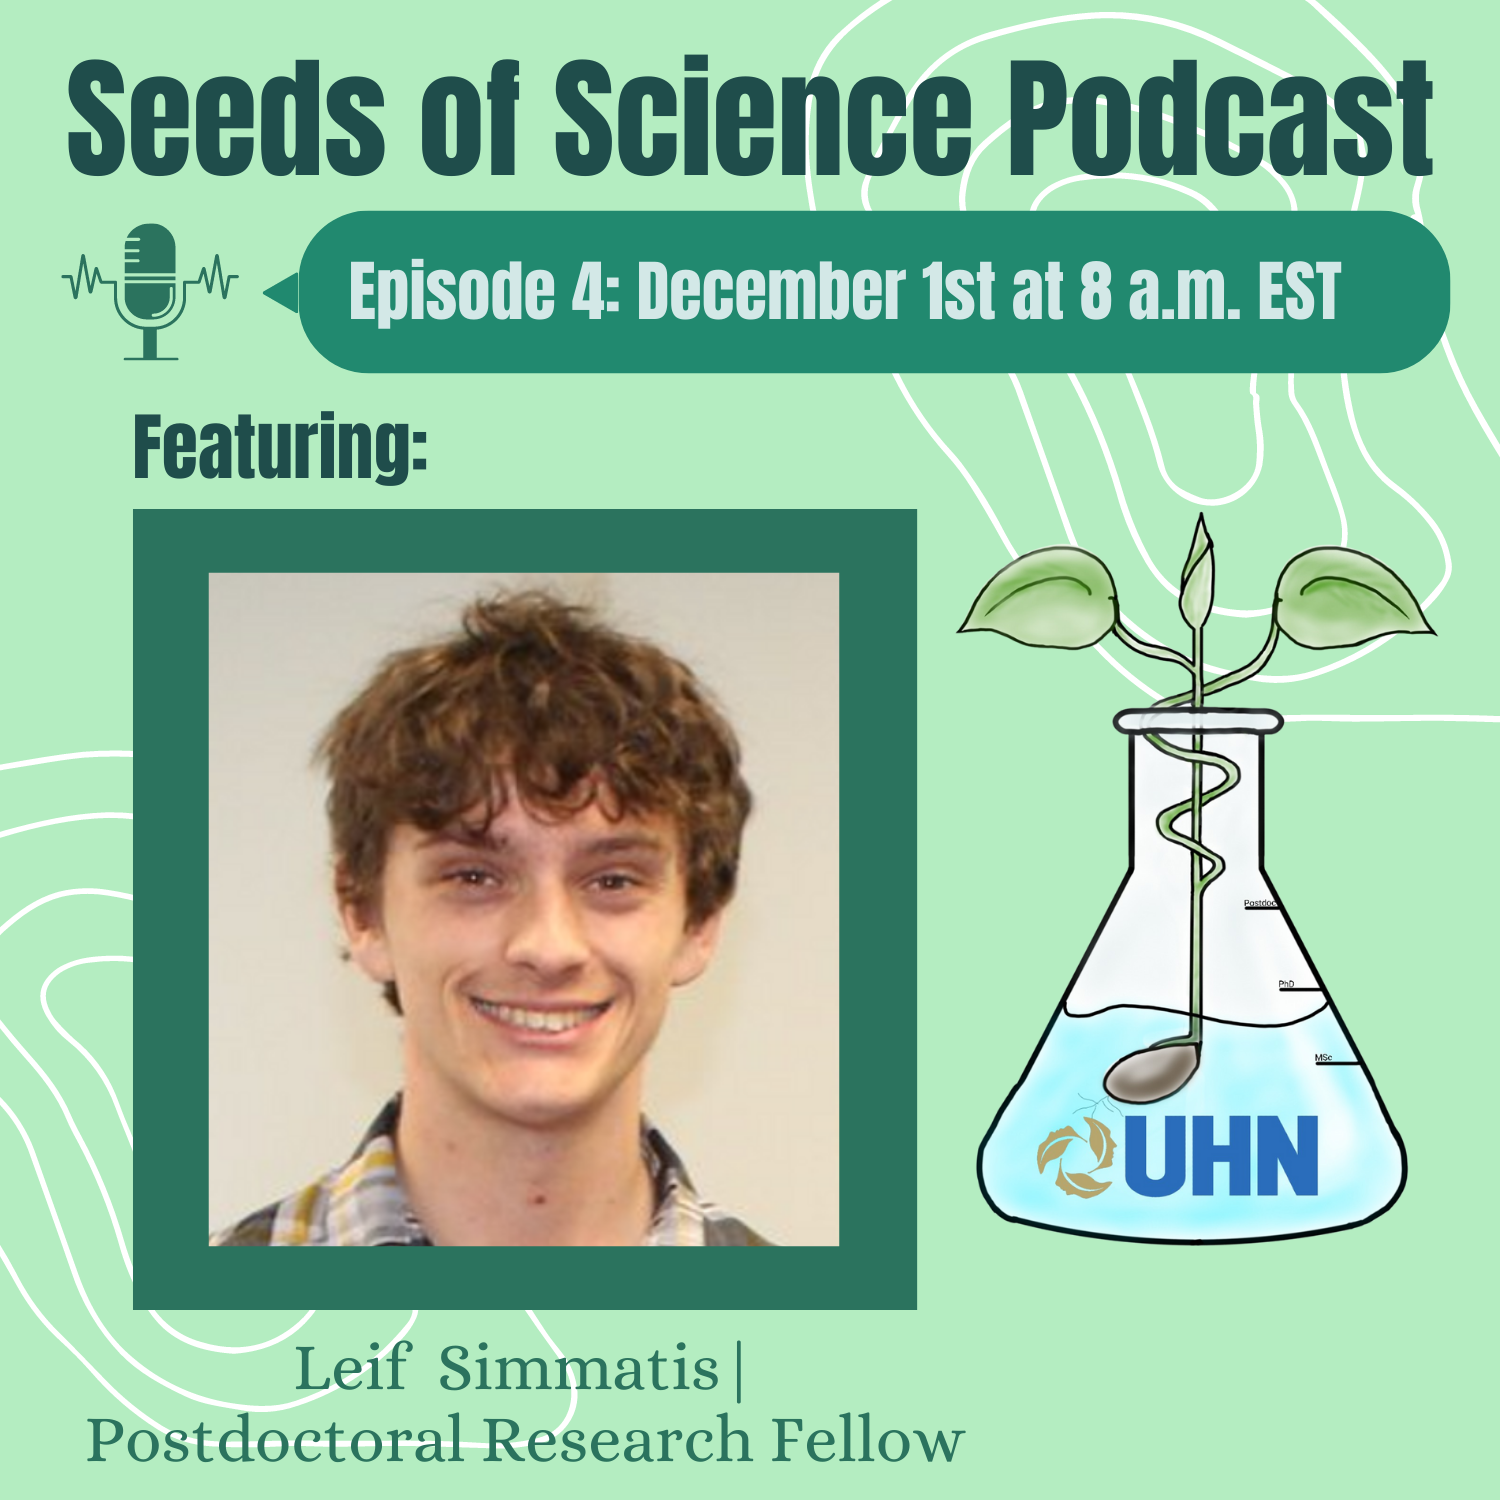 Seeds of Science Podcast Poster. Episode 4: December 1st at 8 am EST. Featuring Leif Simmatis Postdoctoral Research Fellow